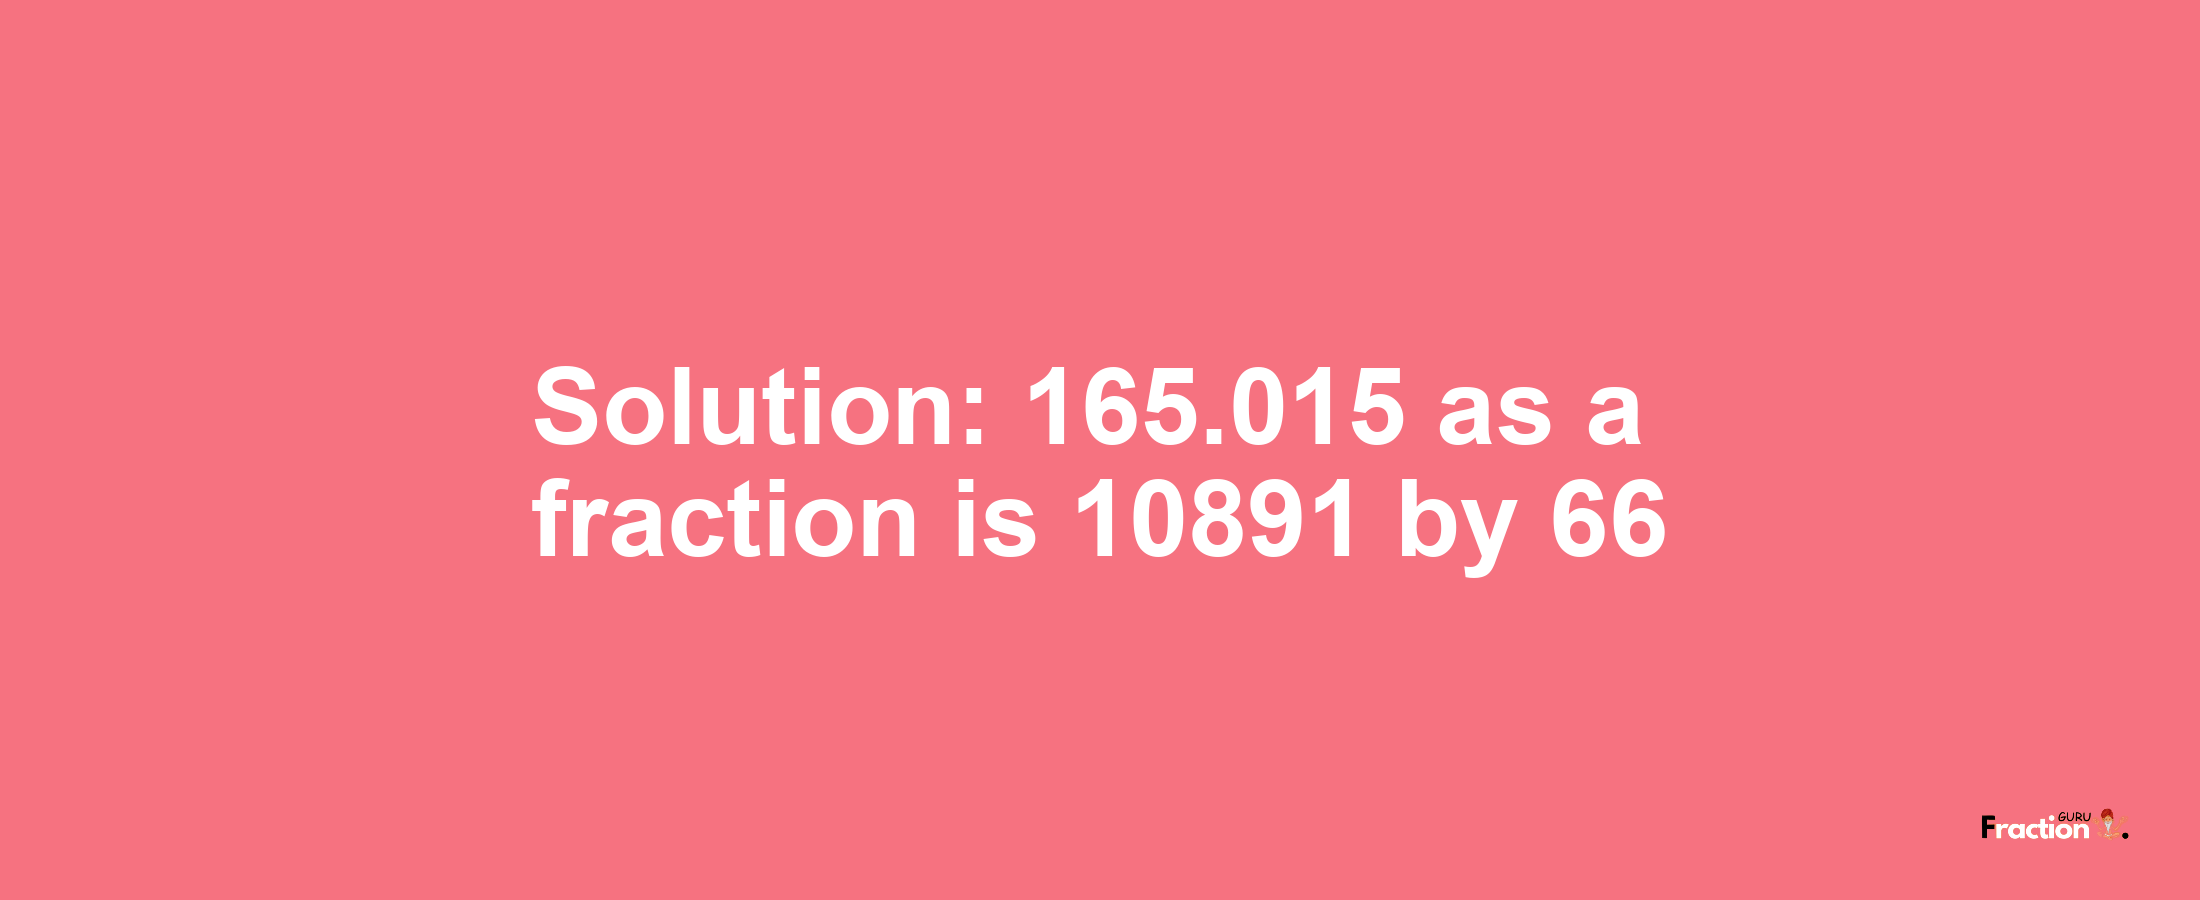 Solution:165.015 as a fraction is 10891/66